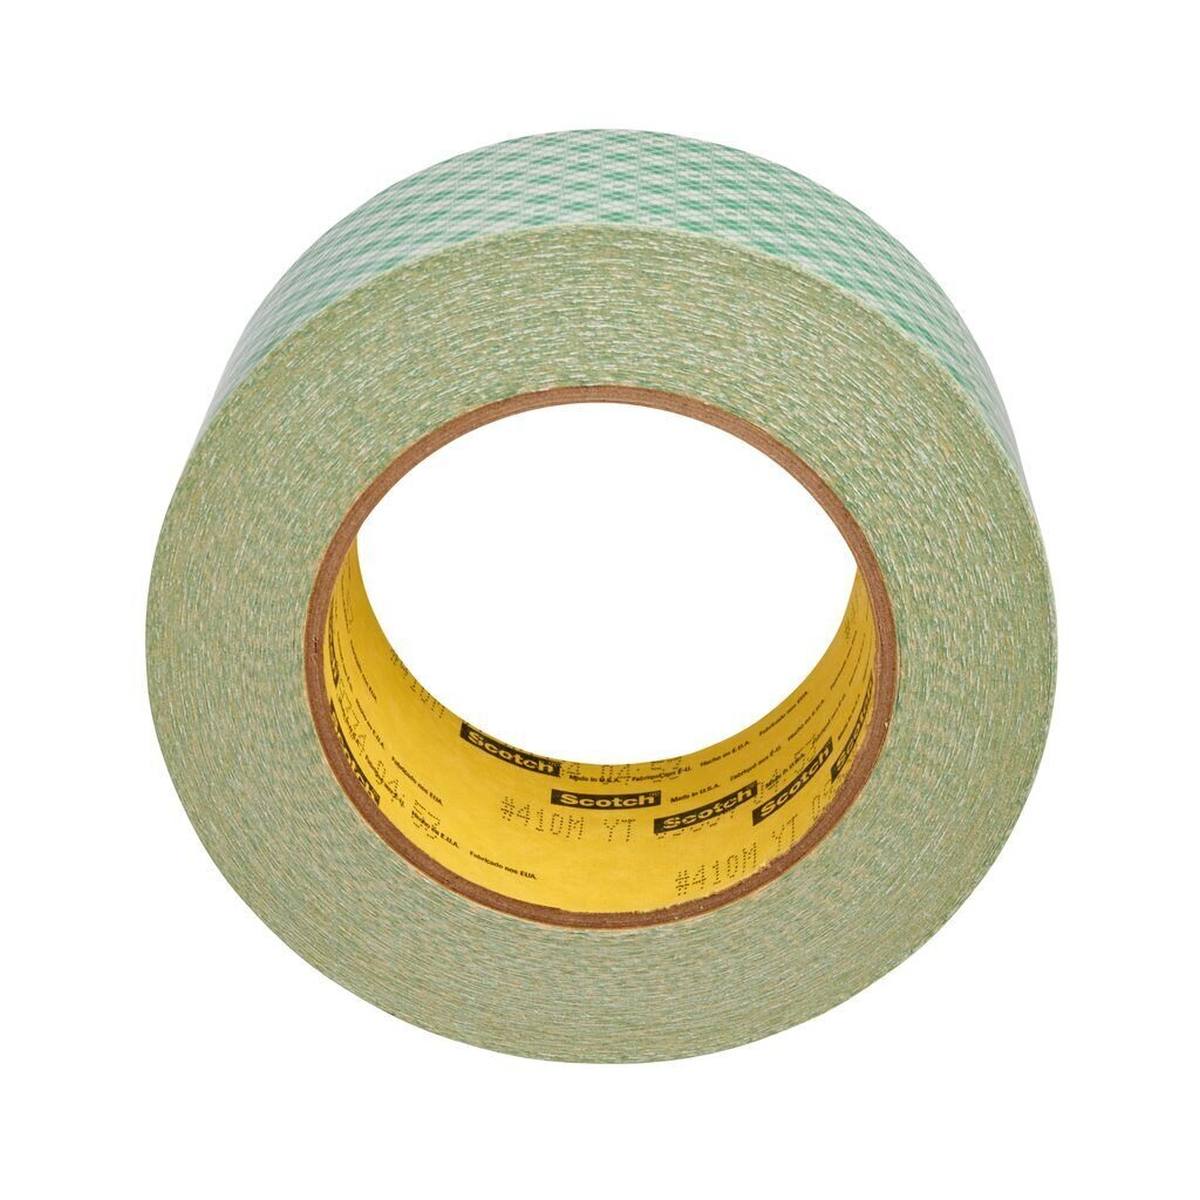 3M Double-sided adhesive tape with non-woven paper backing 410M, white, 25.4 mm x 33 m, 0.13 mm